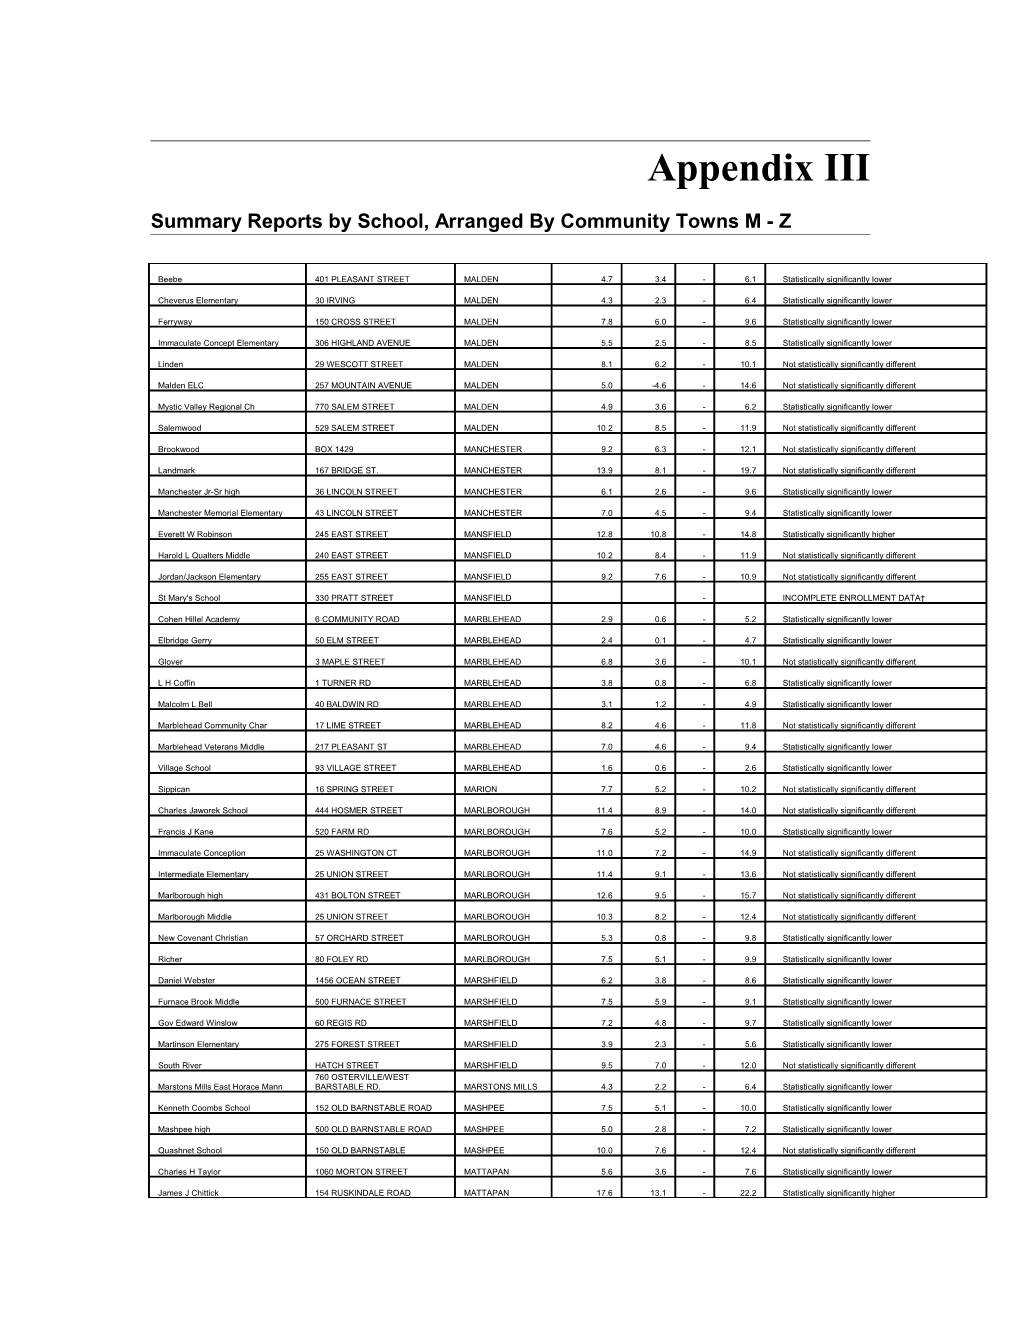 Summary Reports by School, Arranged by Community Towns M - Z